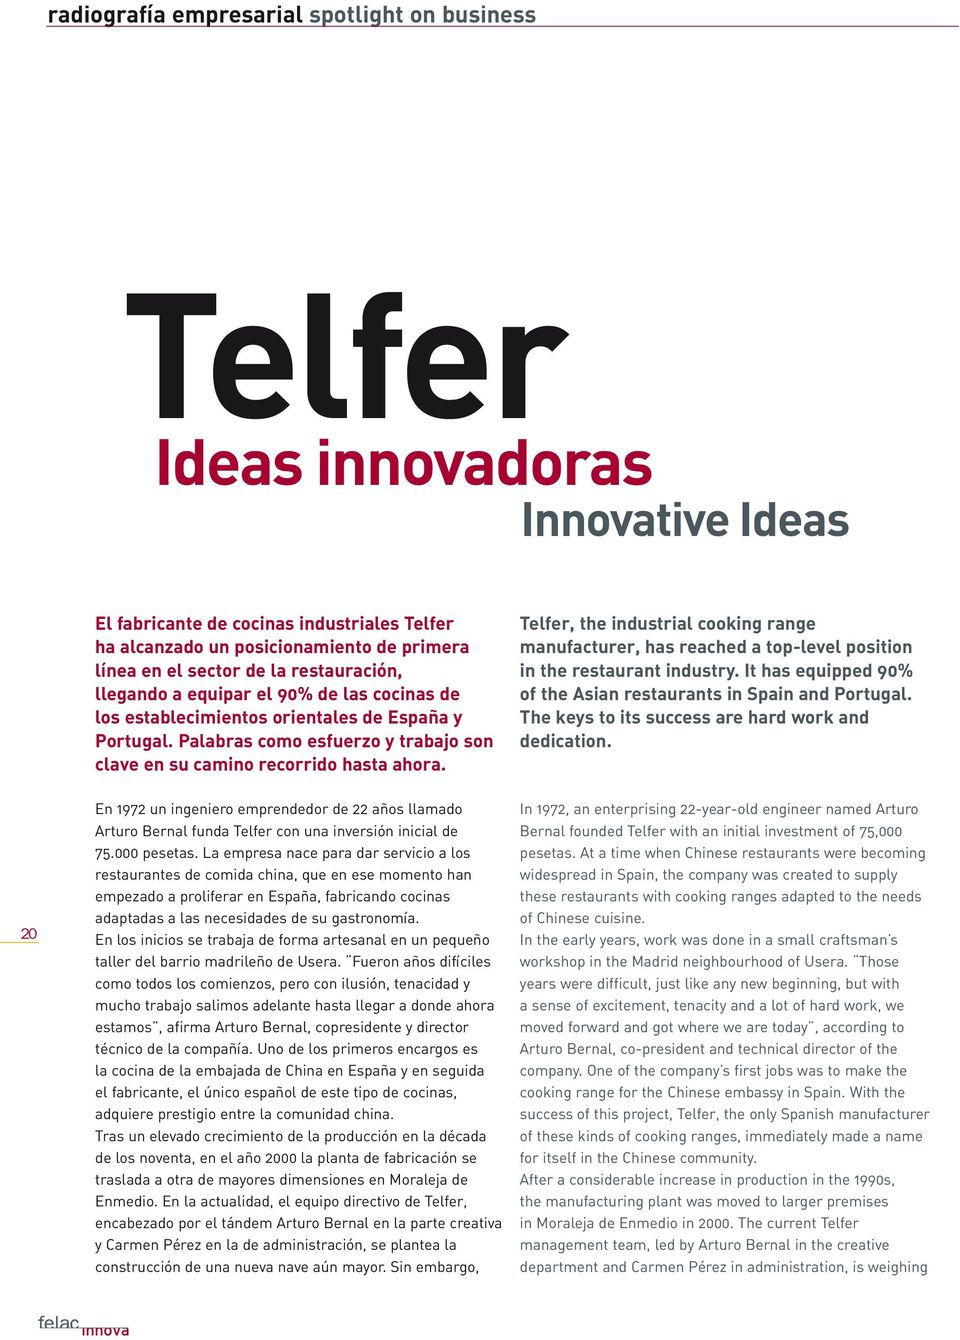 Telfer, the industrial cooking range manufacturer, has reached a top-level position in the restaurant industry. It has equipped 90% of the Asian restaurants in Spain and Portugal.